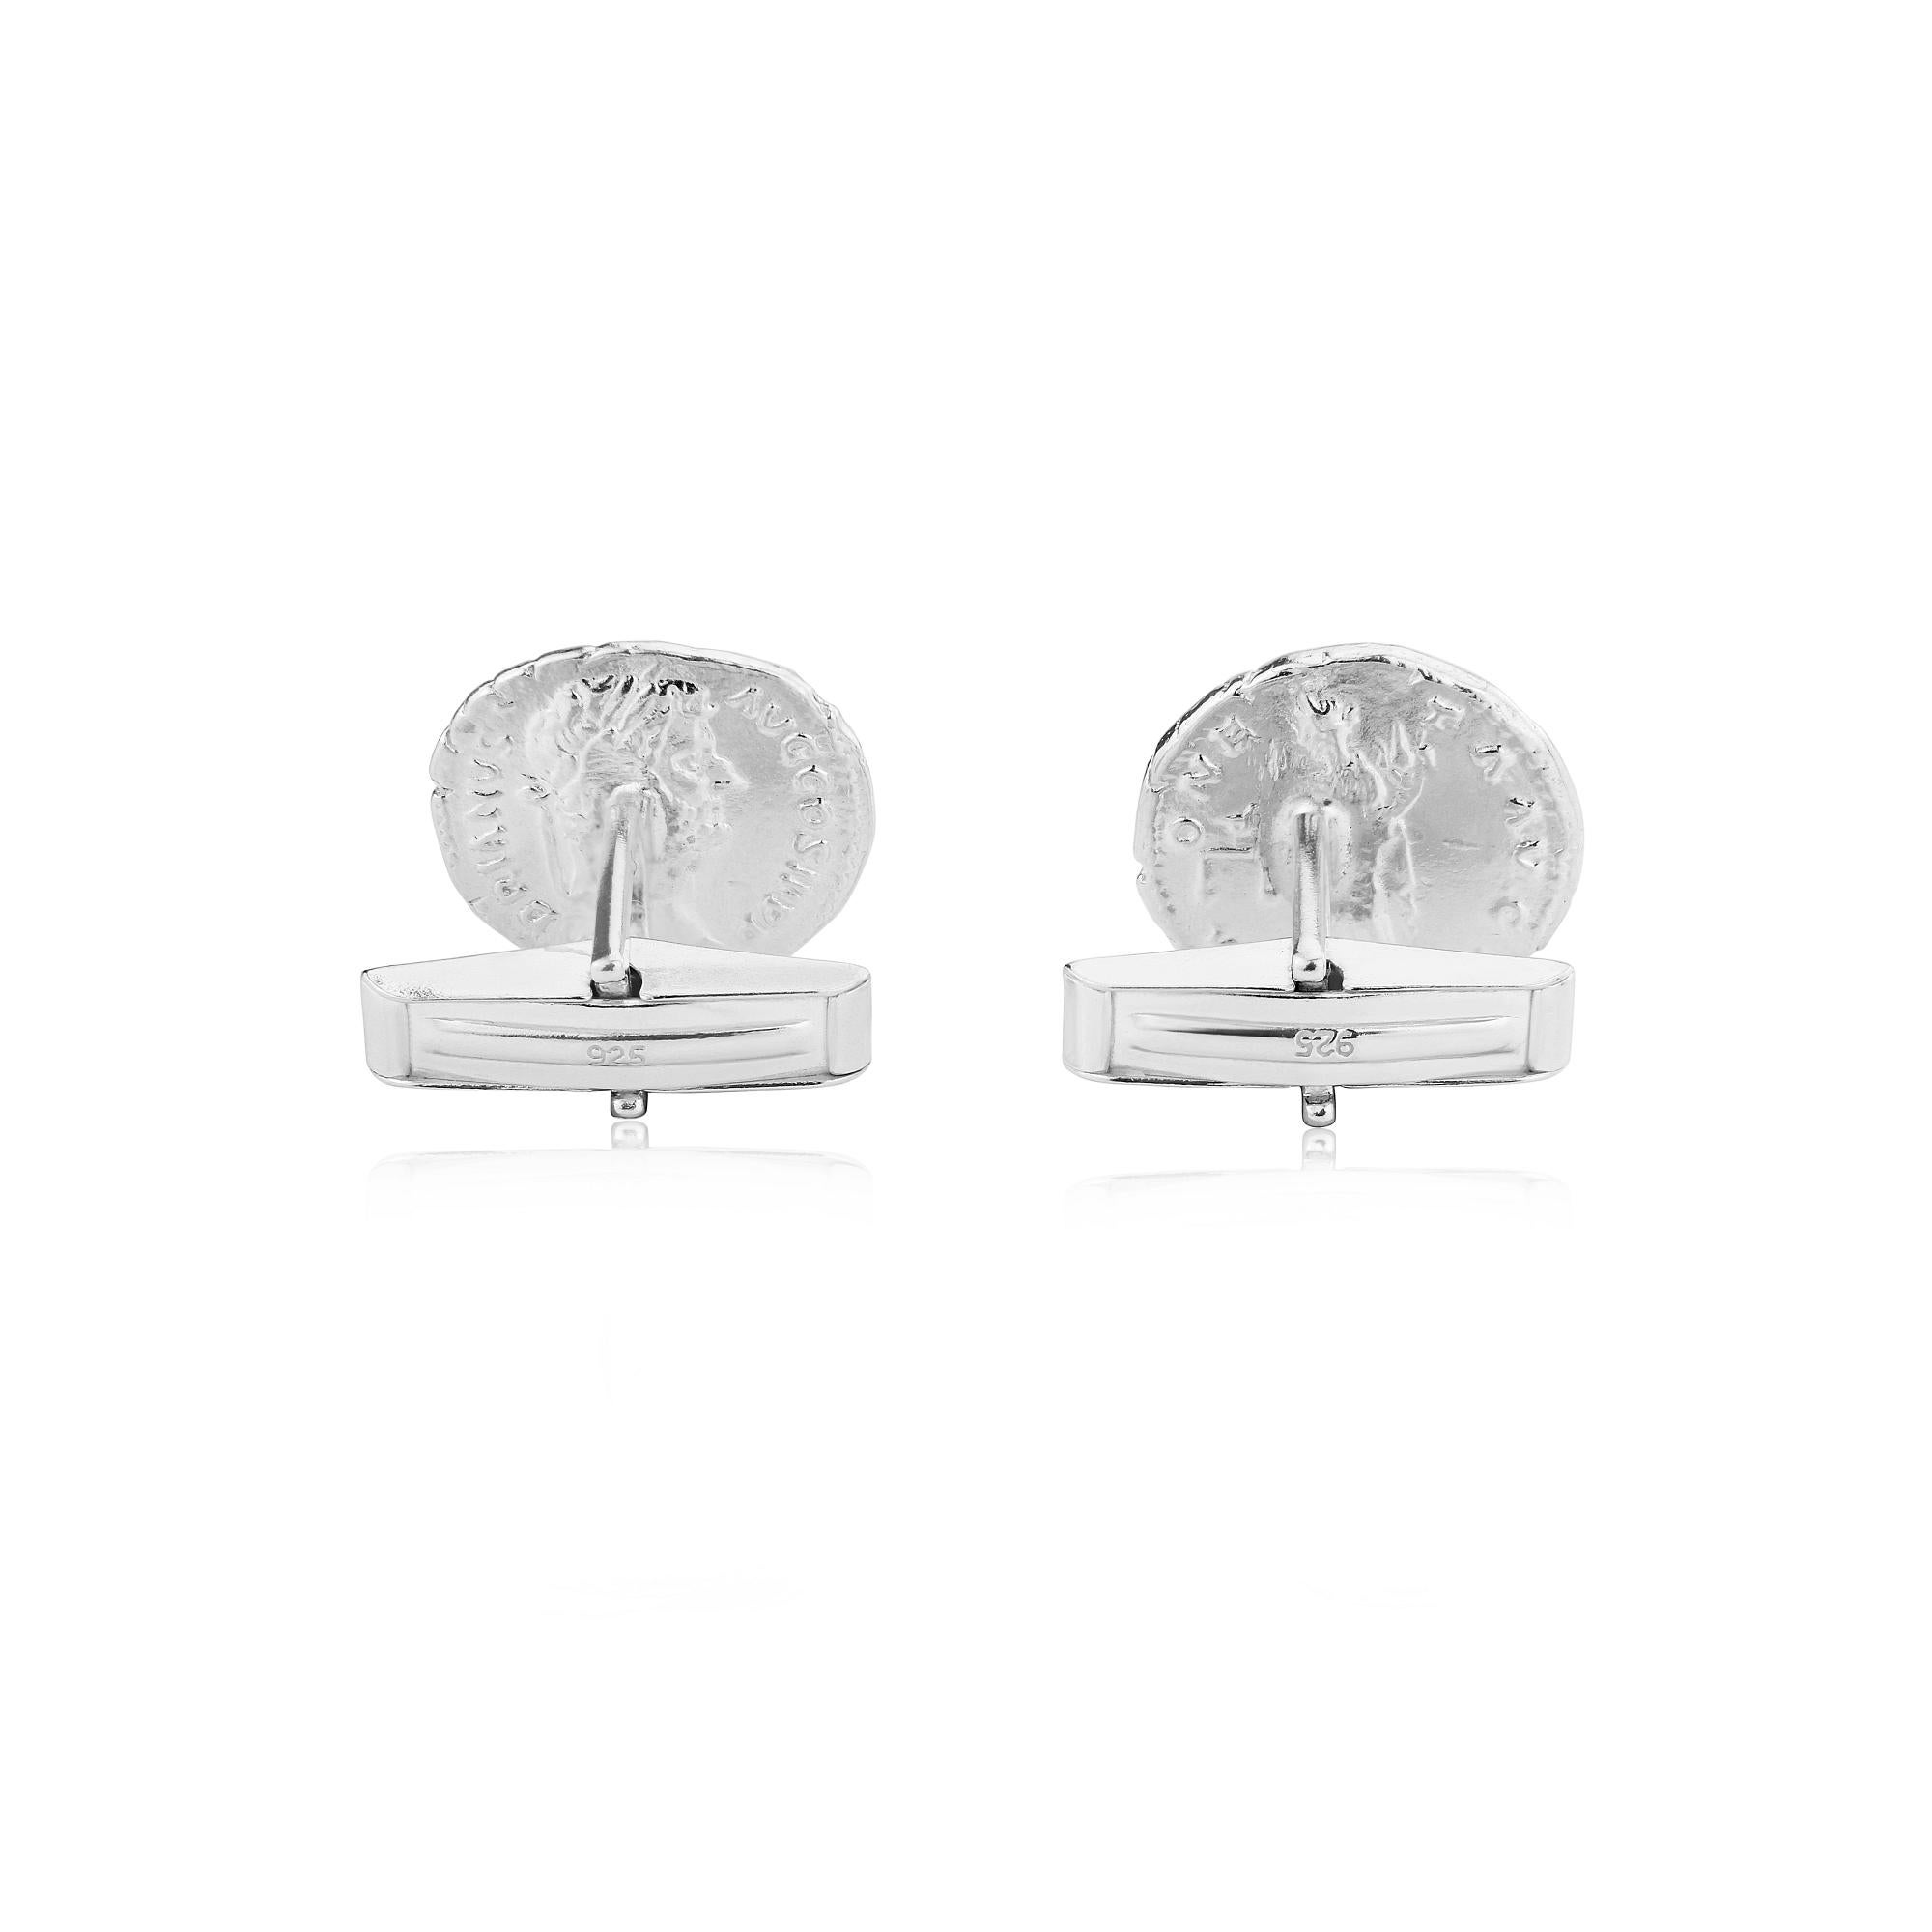 Classical Roman Emperor Hadrian Cufflinks in Sterling Silver For Sale